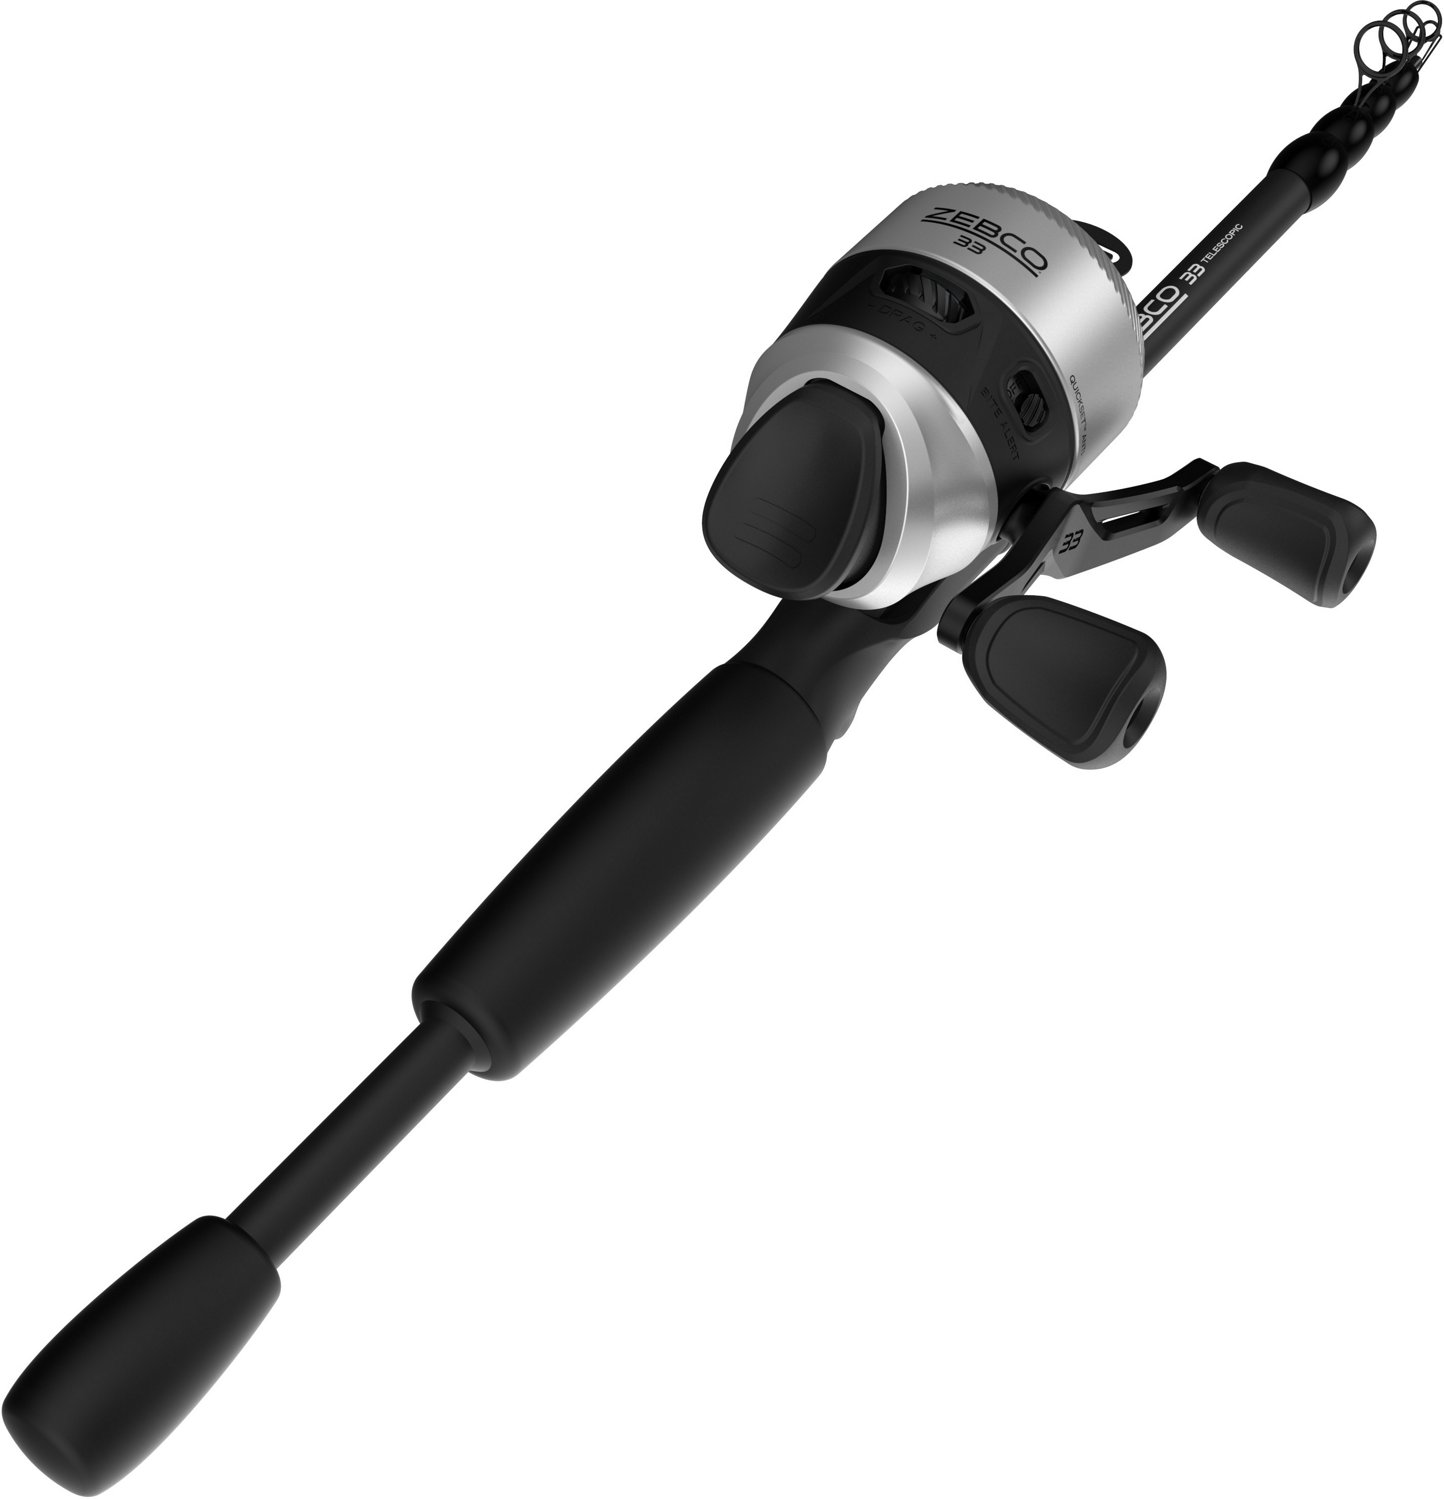 Zebco 33 Platinum Spincast Reel and Fishing Rod Combo, 5-Foot 6